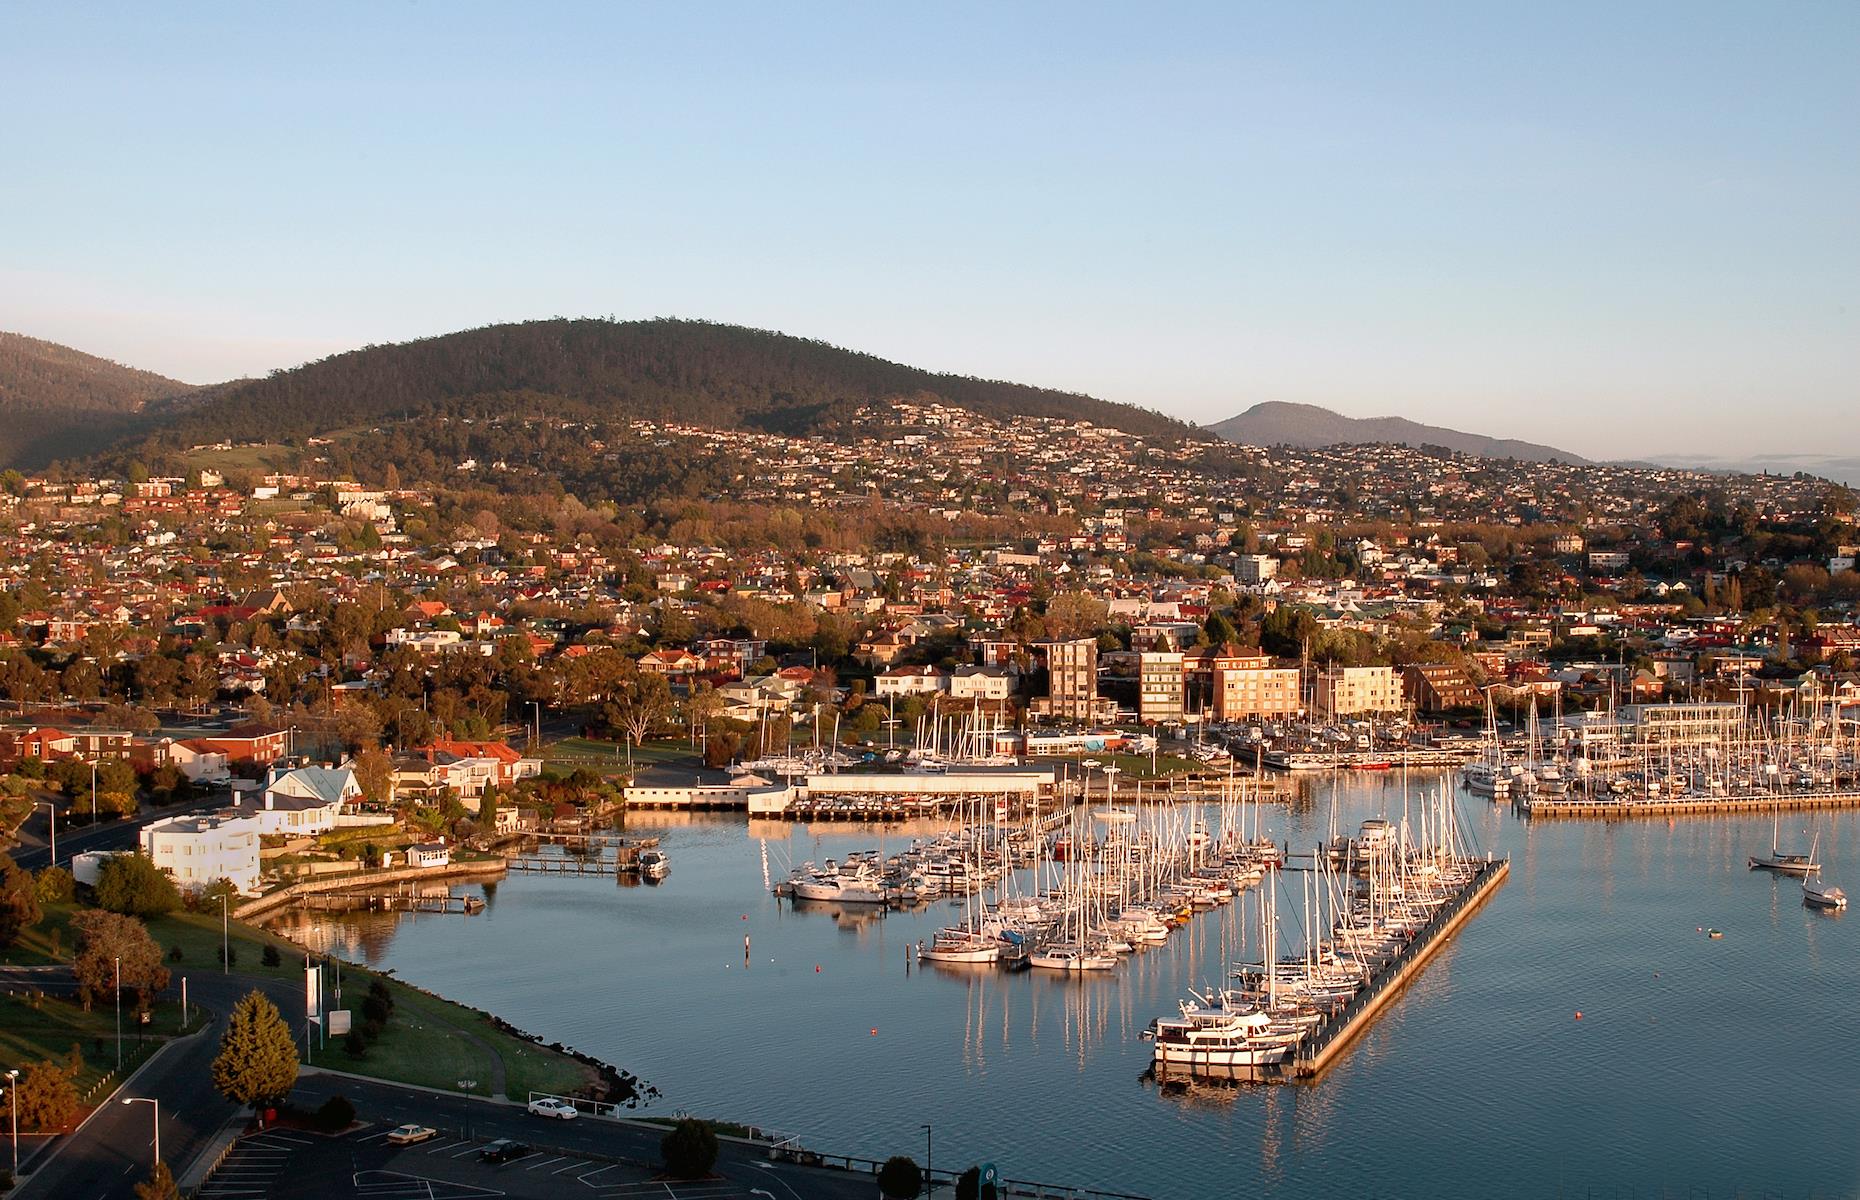 <p>The second oldest city in Australia, Hobart oozes old-world charm. A notoriously rough and ready place, the far-flung settlement officially began in 1804 after Lieutenant David Collins set up a penal site on Van Diemen’s Land's south coast. Their arrival devastated the Muwinina and Mumirimina people. The harbor soon attracted whalers and sealers, eventually becoming a major whaling port that was notorious for its rowdy pubs and brothels. Female convicts were housed in the city’s south – you can learn about the inhabitants and the brutality they suffered at the <a href="https://femalefactory.org.au/">Cascades Female Factory</a>, which opened in 1828 and is now one of 11 World Heritage-listed convict sites in Australia.</p>